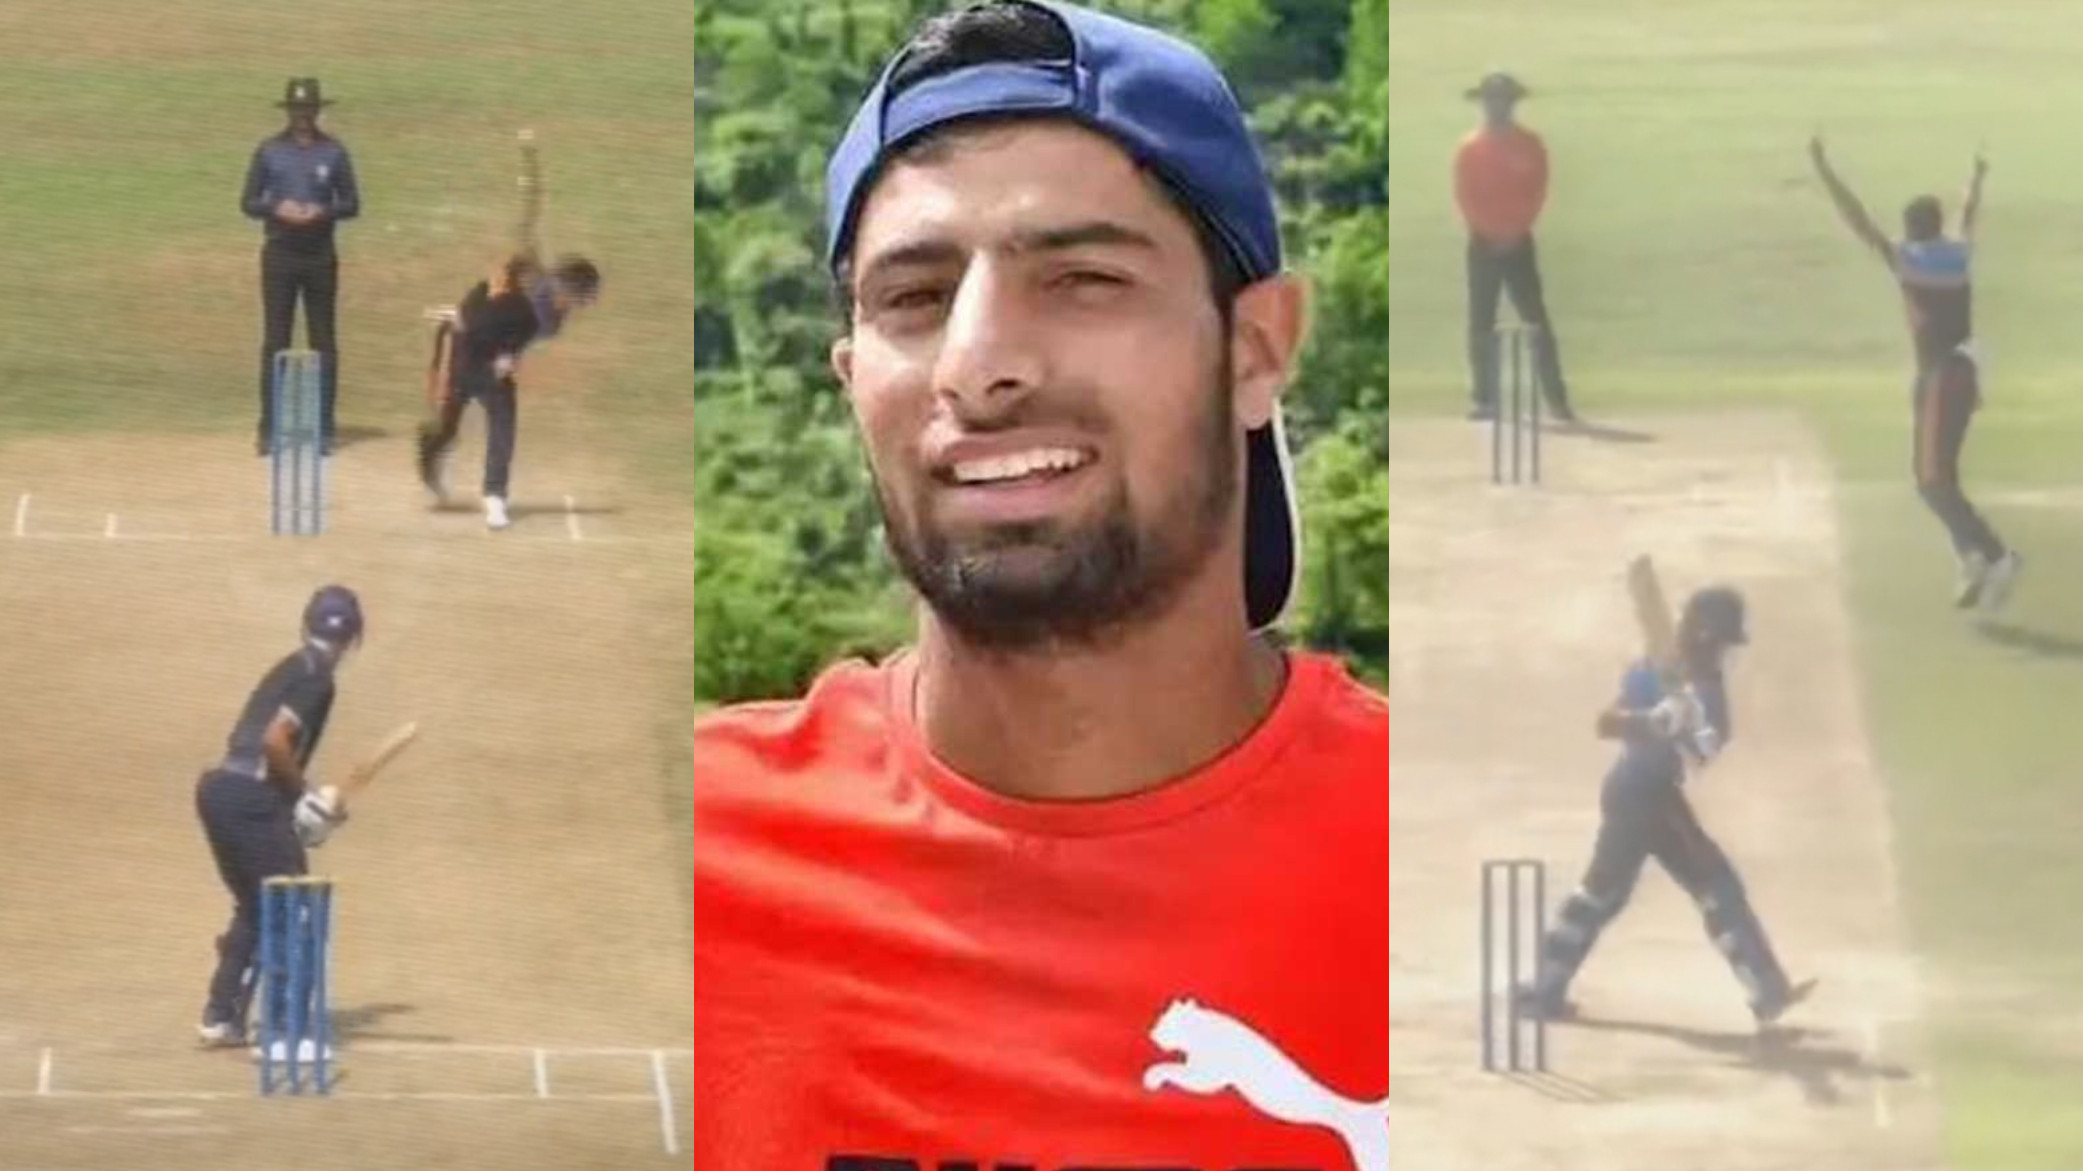 WATCH- J&K pacer Waseem Bashir impresses with his speed in a viral video; Twitterati excited at new prospect